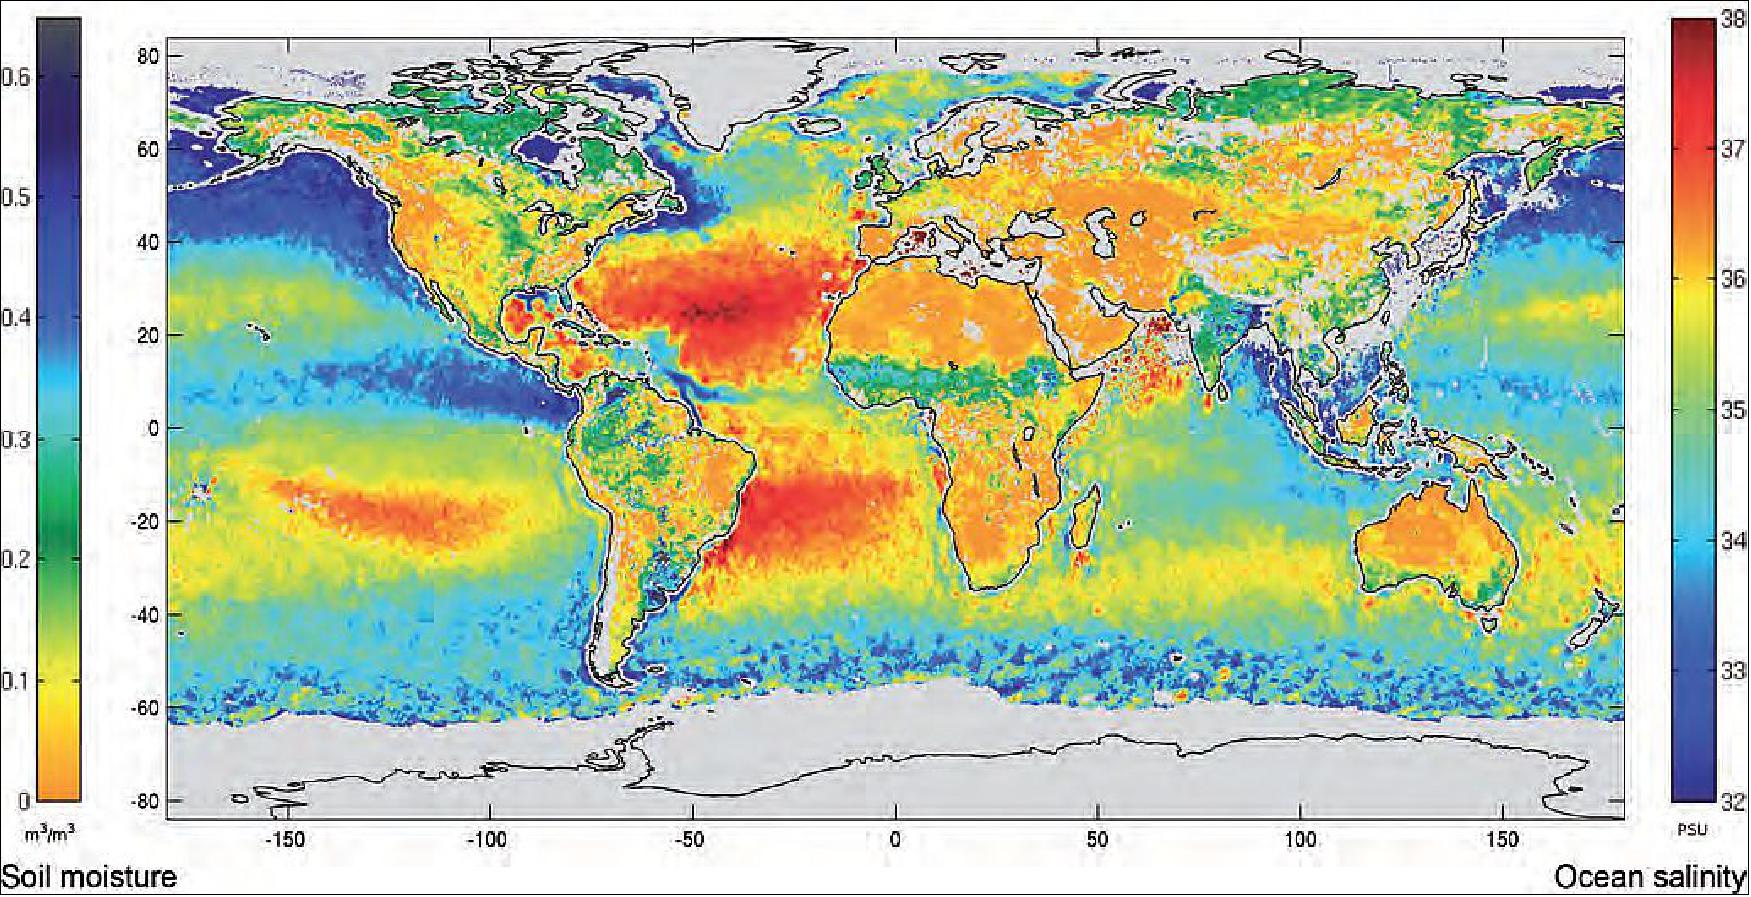 Figure 59: Global map of SMOS-derived soil moisture and sea surface salinity data for August 2015, Level-3 processor version 6 (image credit: CESBIO/CATDS/ESA)